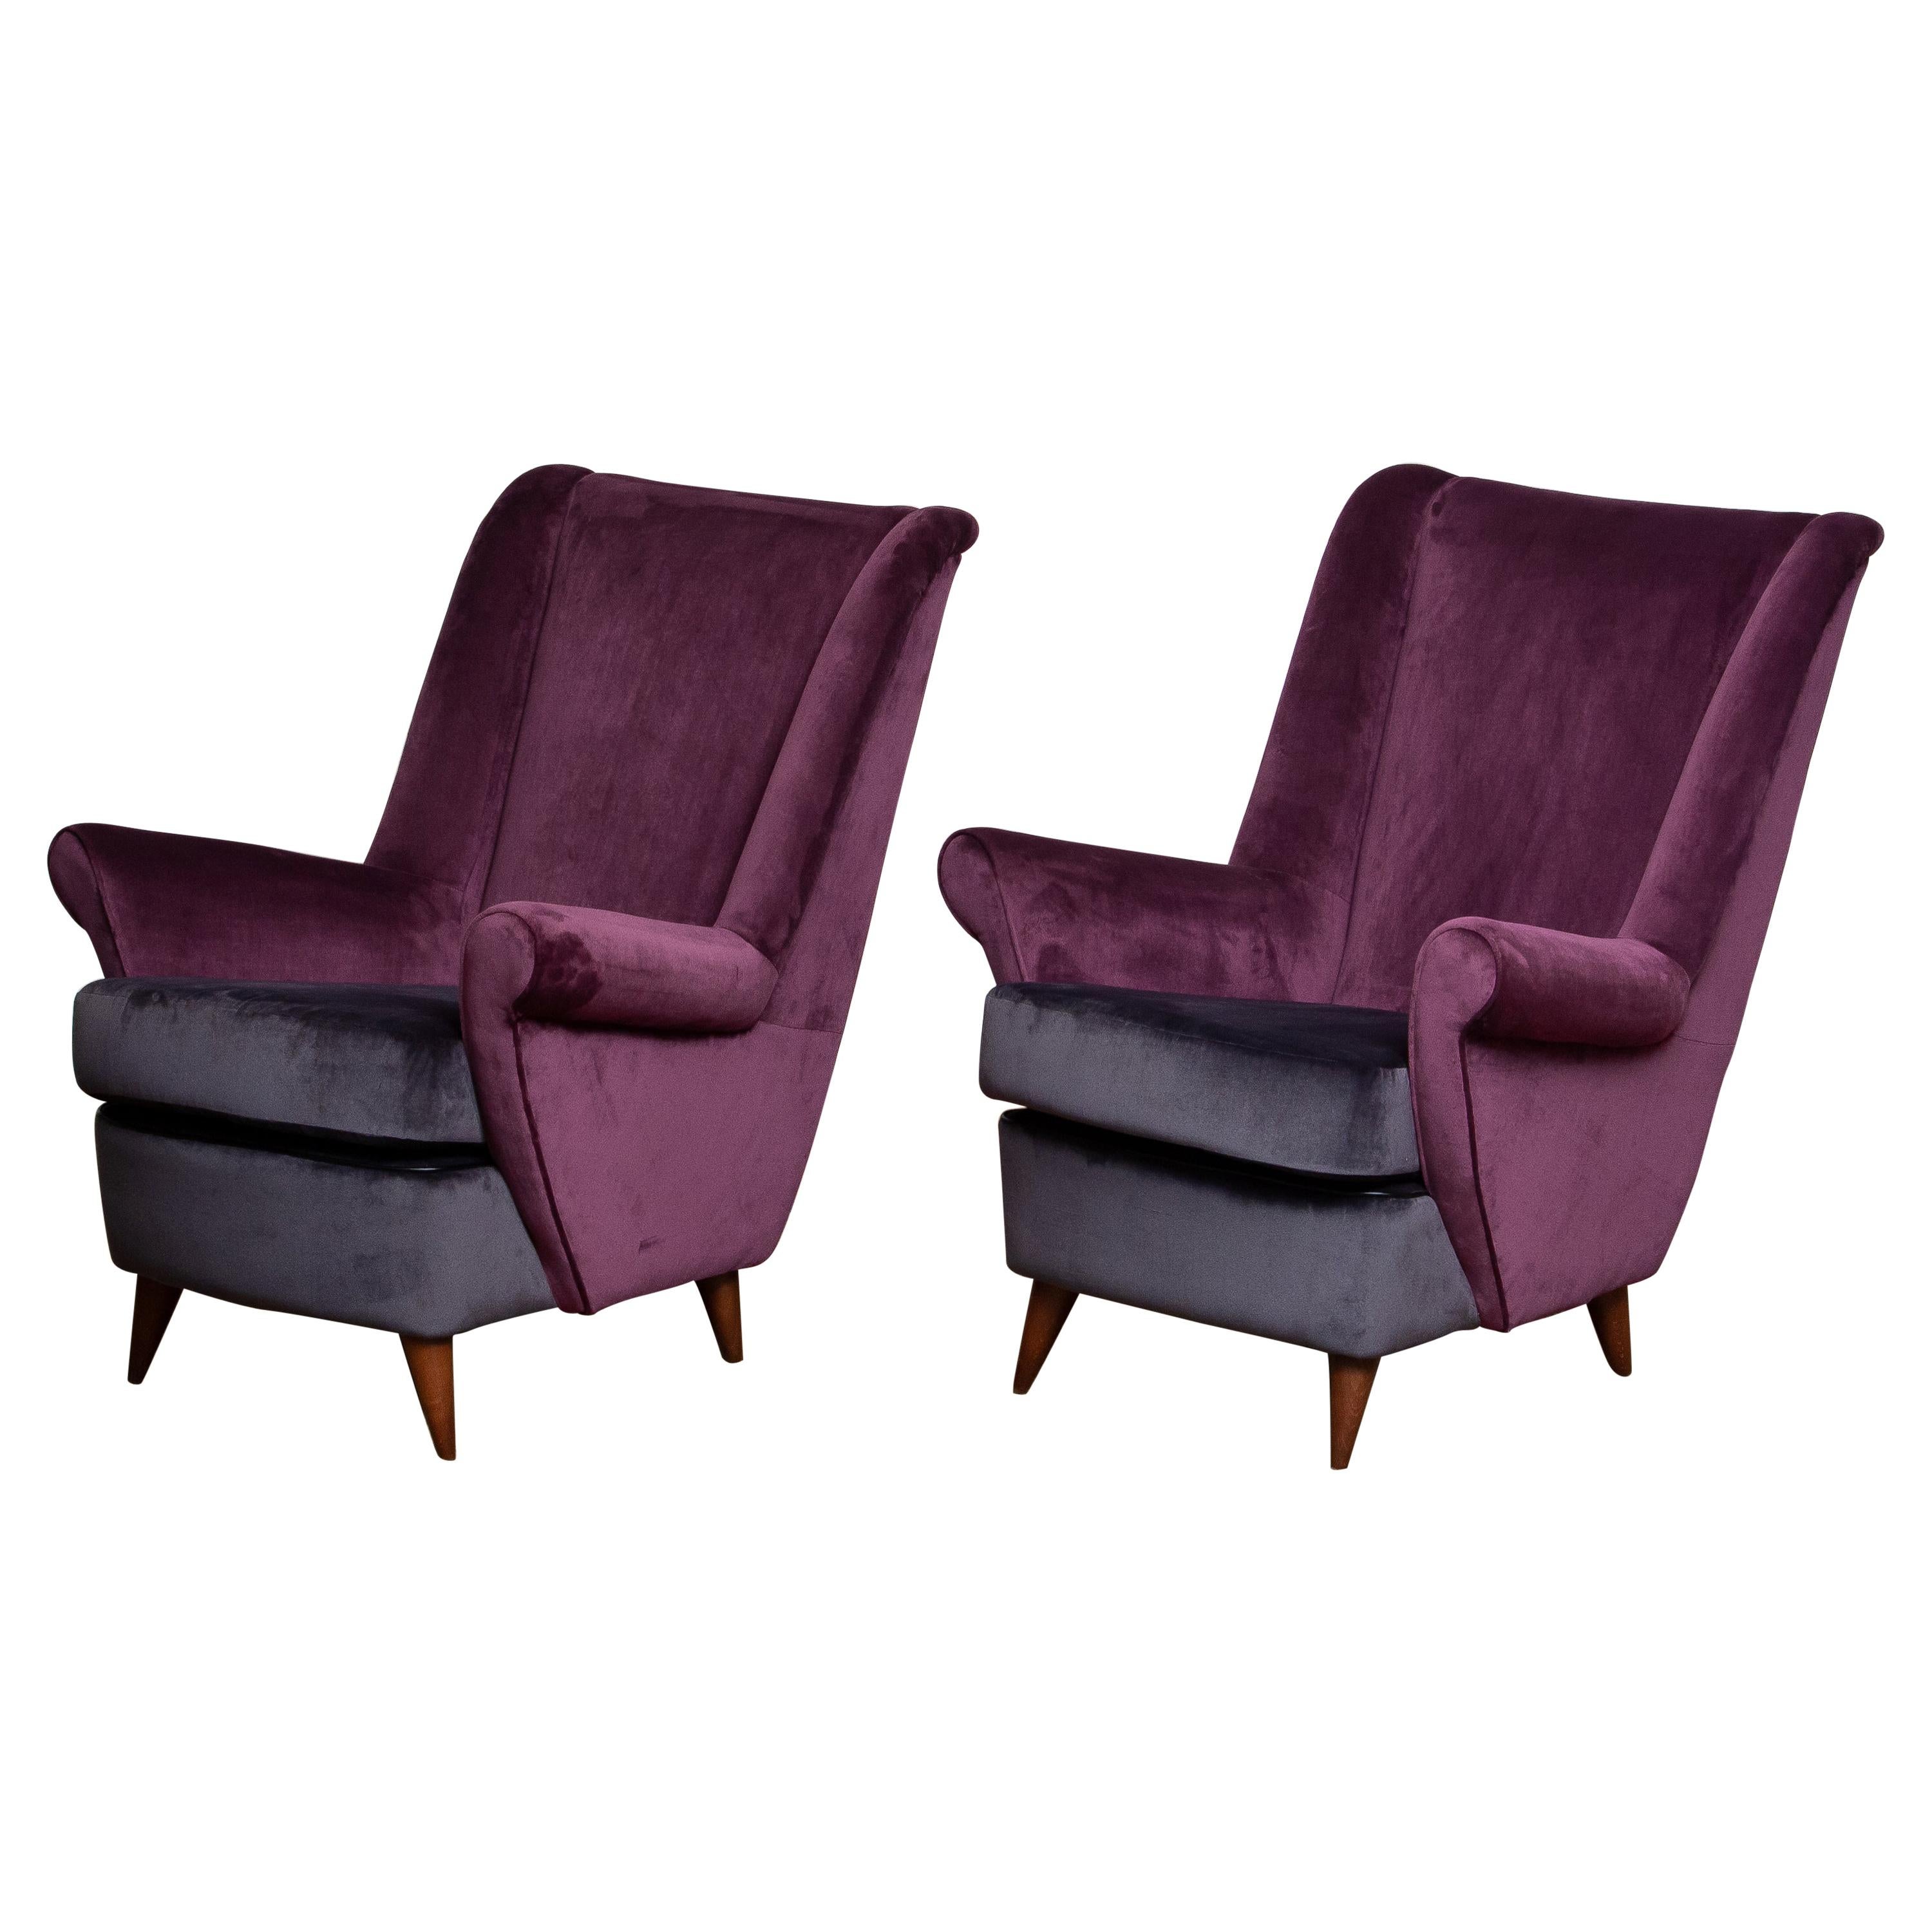 Mid-Century Modern 1950s Pair of Lounge / Easy Chairs Designed Gio Ponti Made by ISA Bergamo, Italy